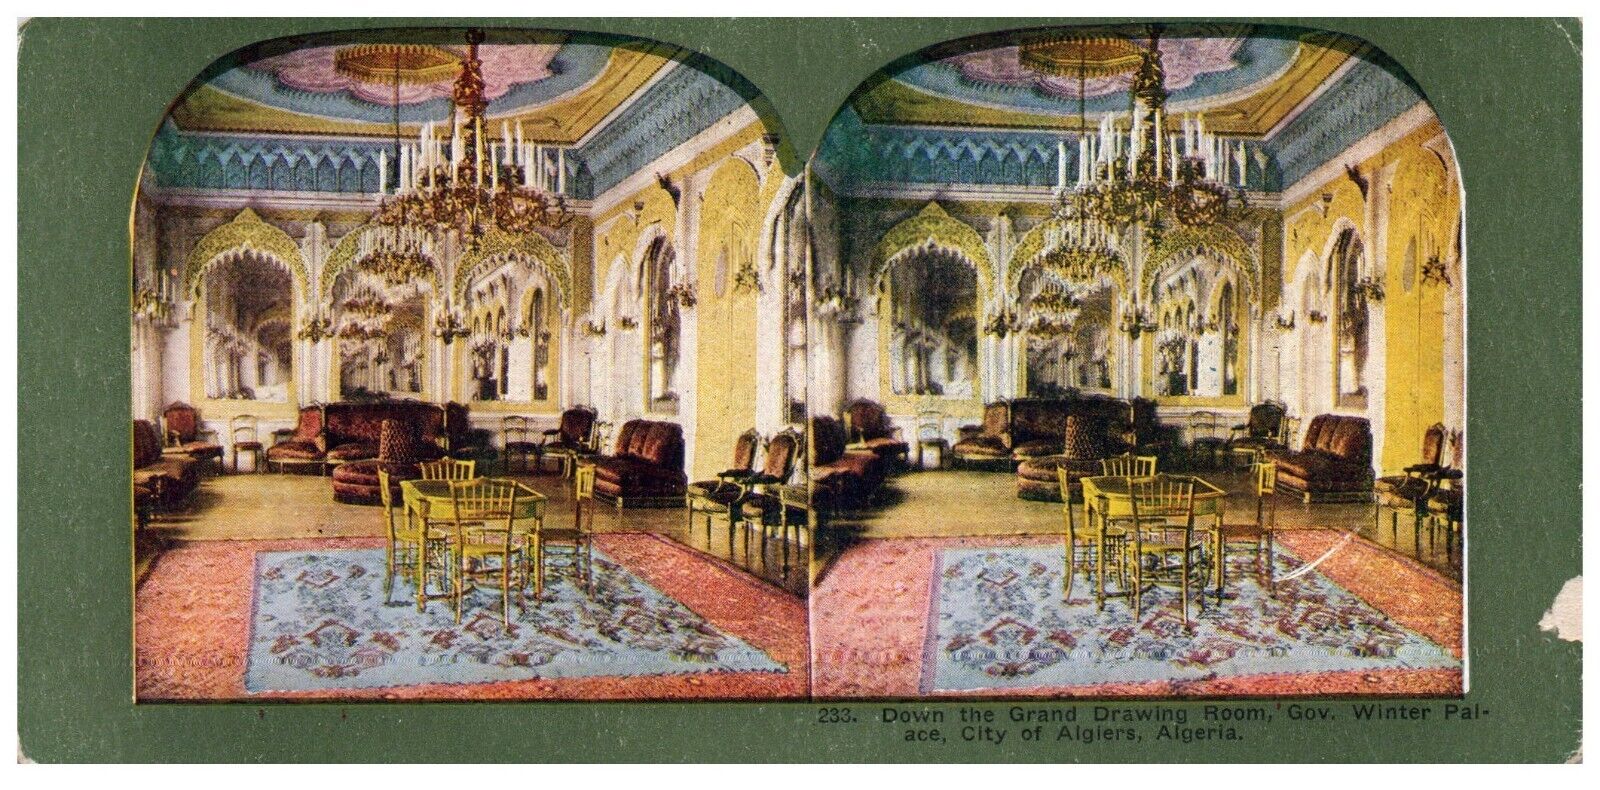 STEREOSCOPE GRAND DRAWING ROOM GOVERNORS PALACE ALGIERS, AGERIA CARD 233